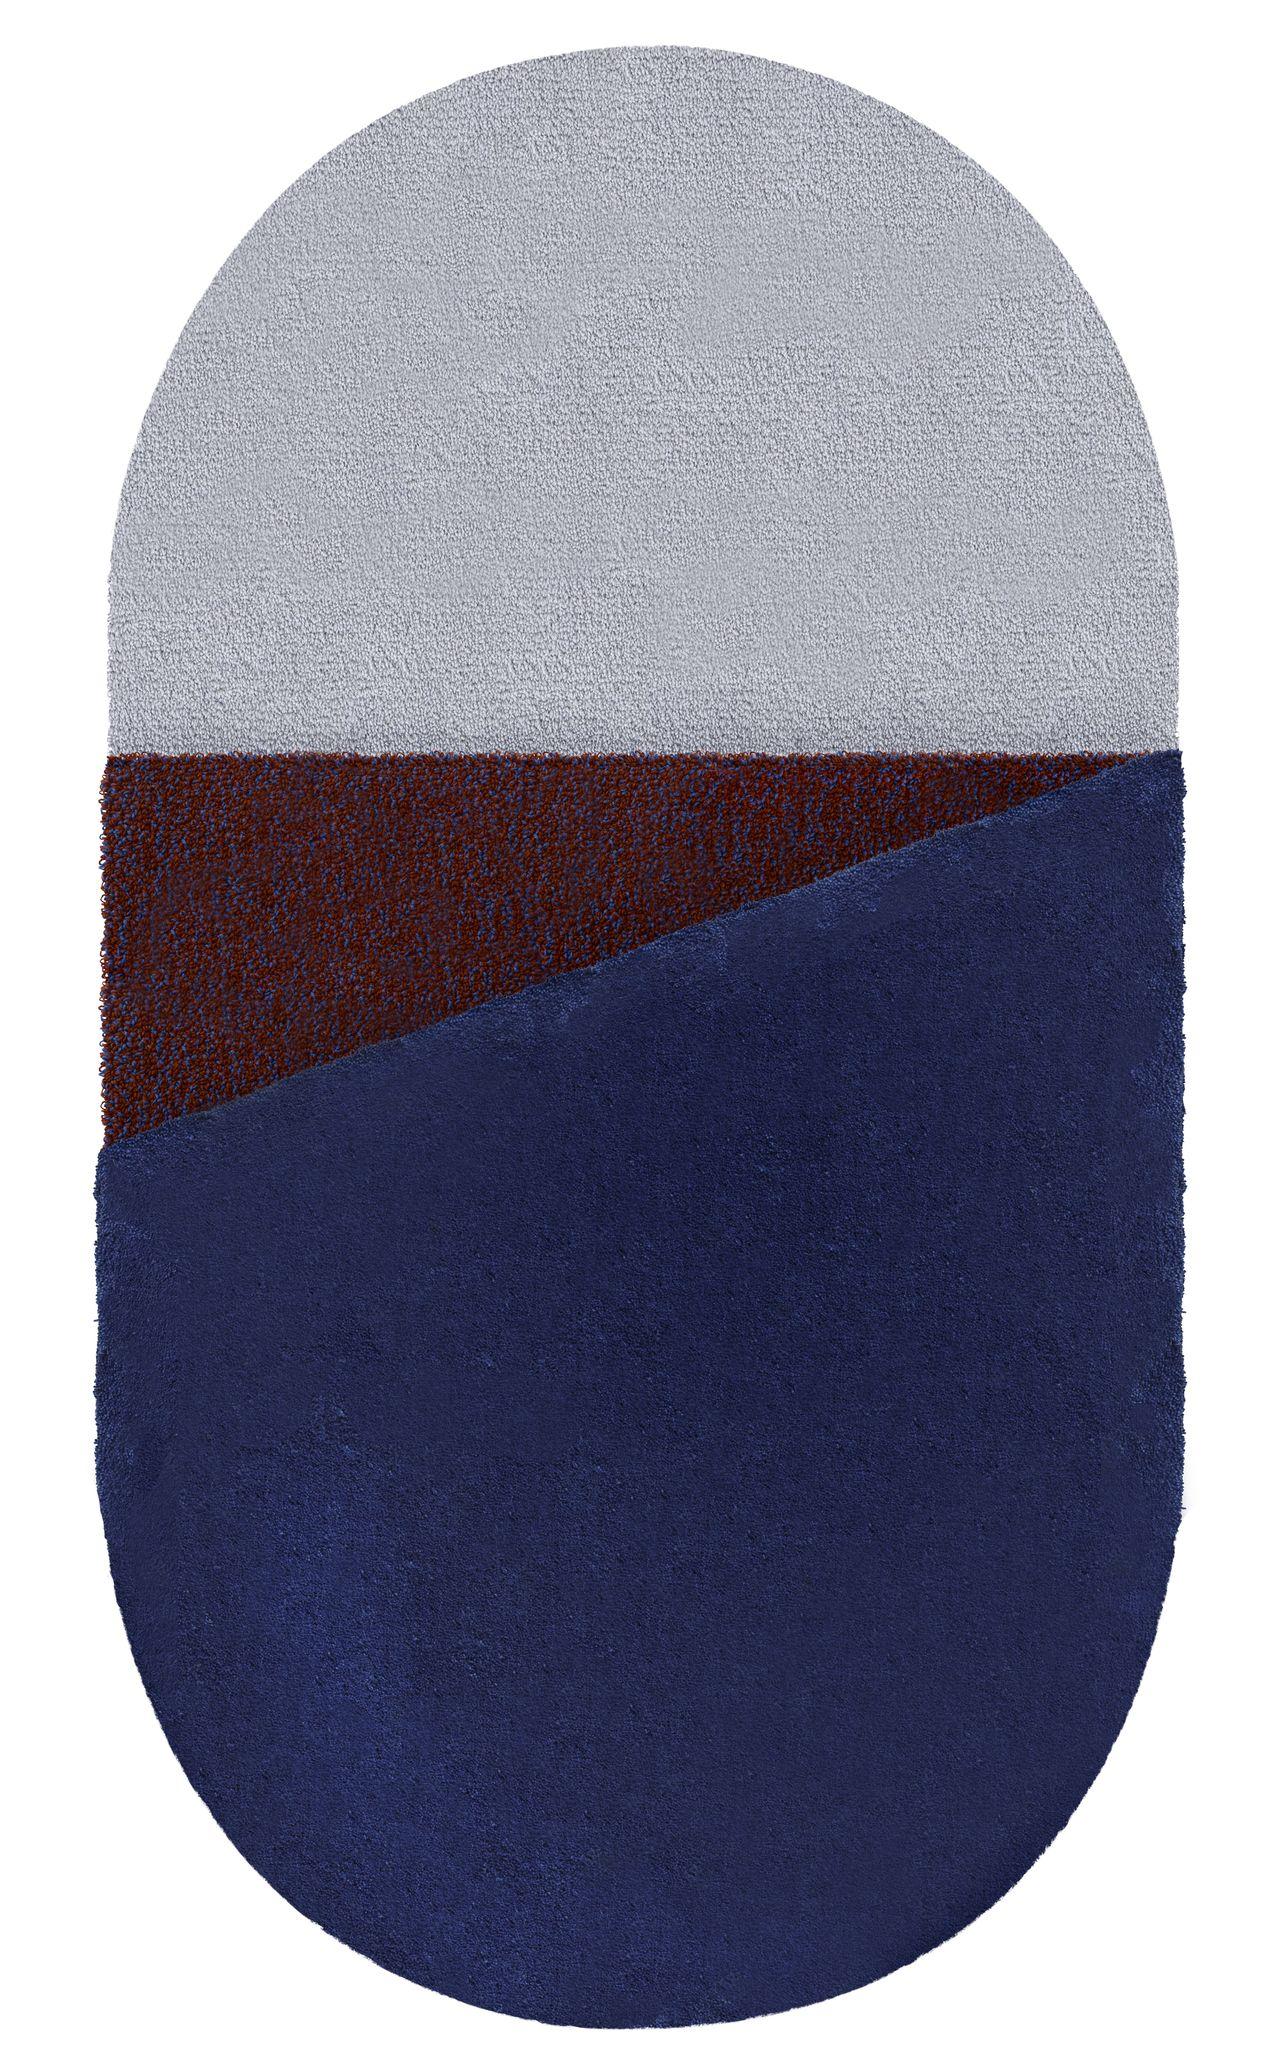 Modern Oci Triptych M, Composition of 3 Rugs 100% Wool /Blue and Brick by Portego For Sale